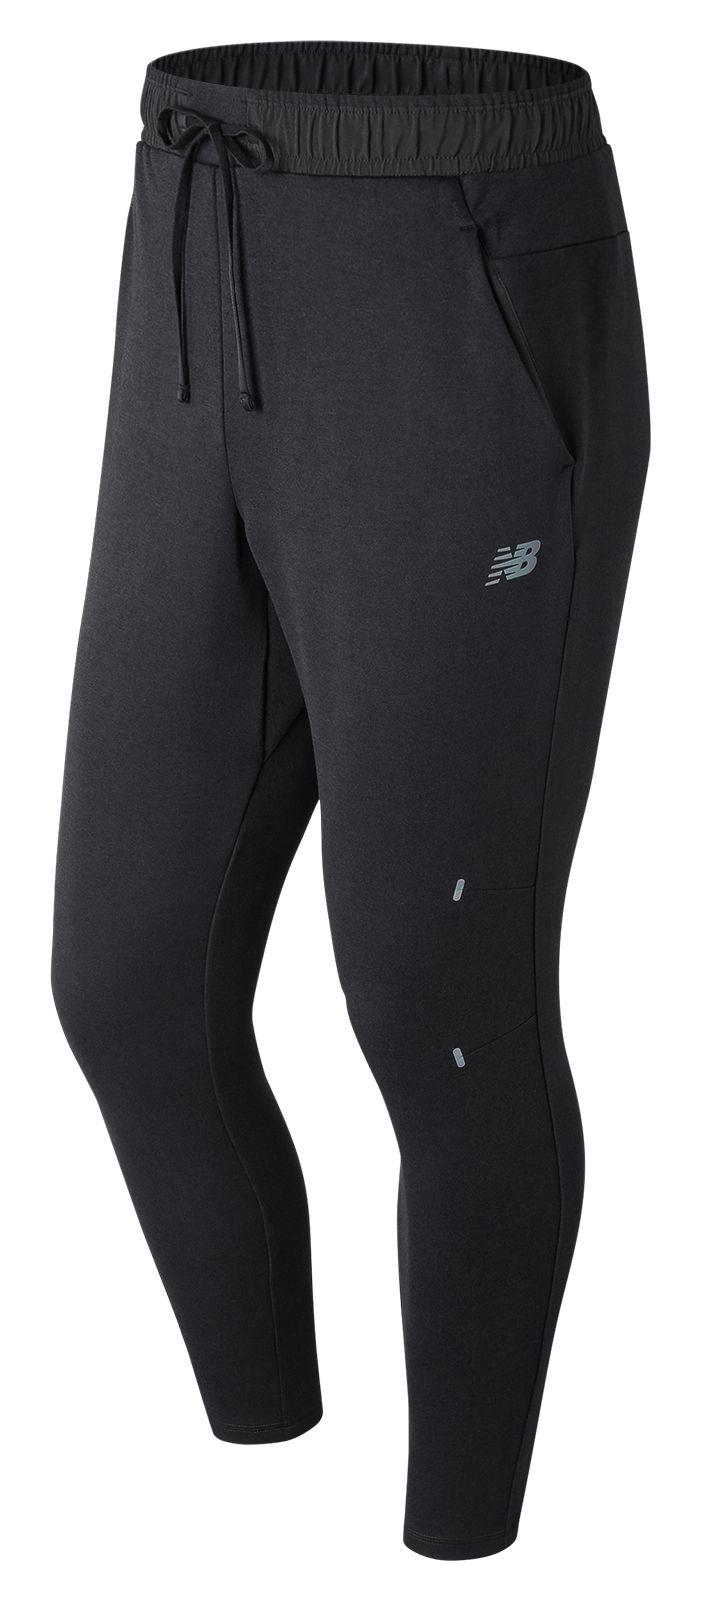 New Balance Synthetic Q Speed Run Pant in Black for Men - Lyst